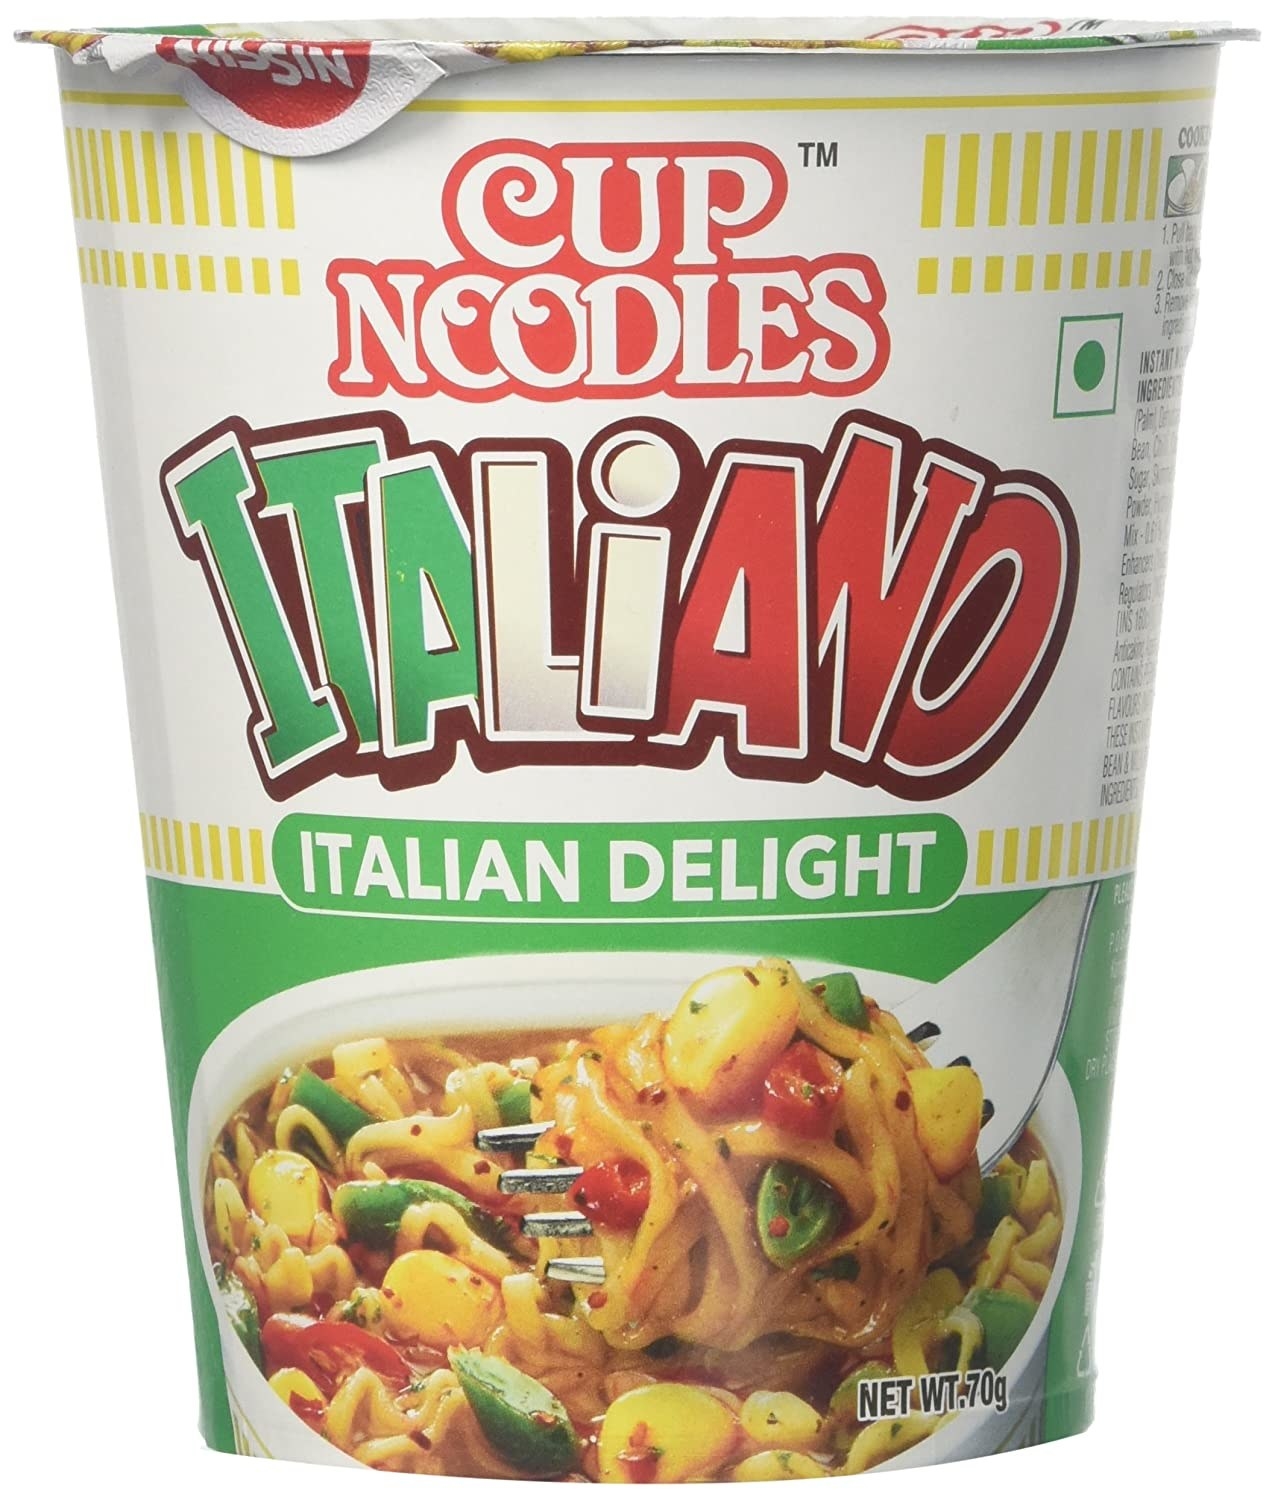 Packaging of the cup noodles 